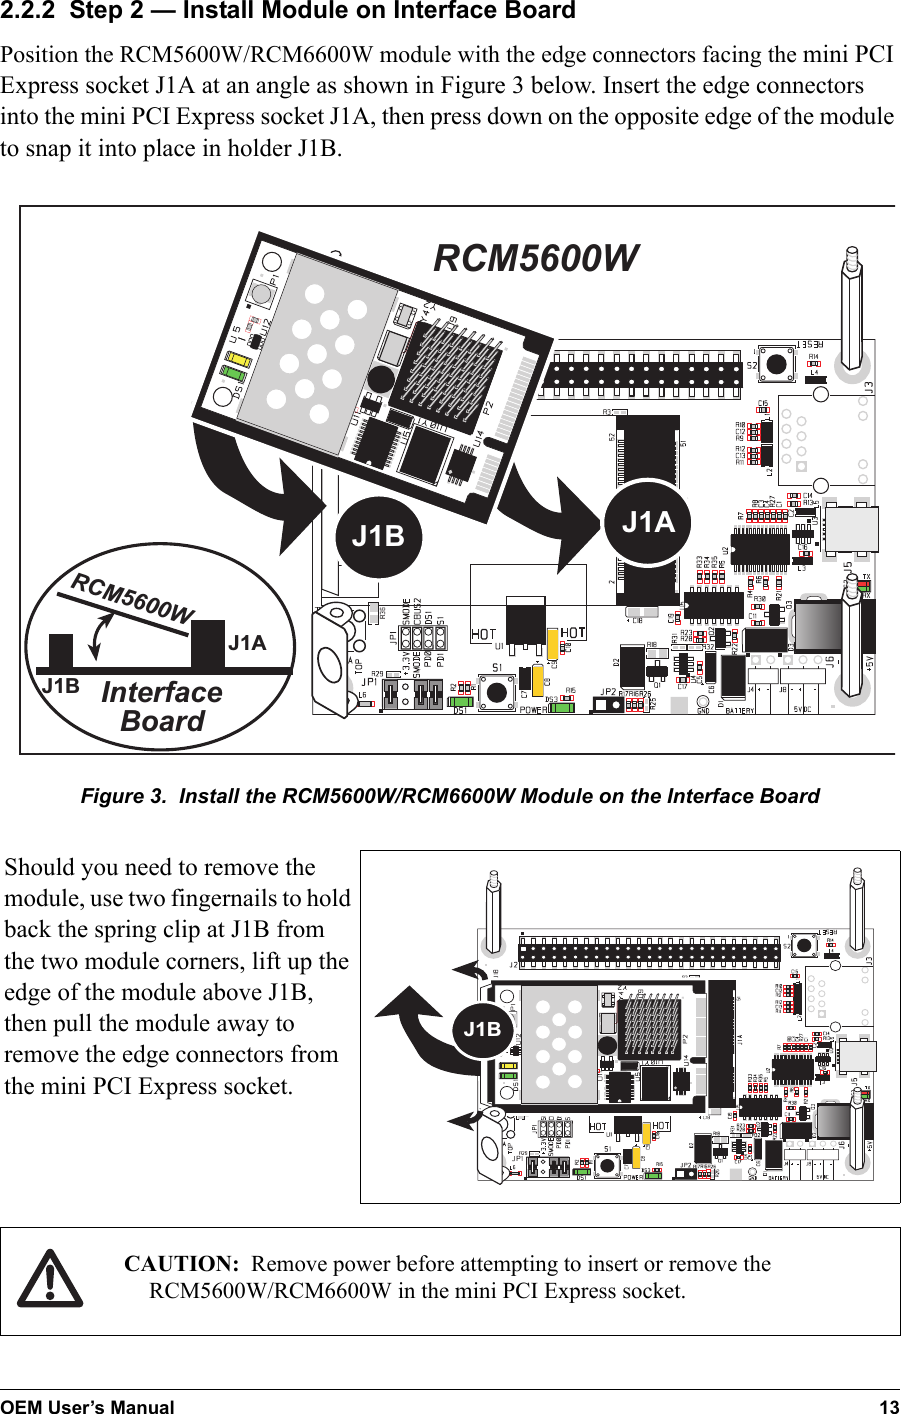 OEM User’s Manual 132.2.2  Step 2 — Install Module on Interface BoardPosition the RCM5600W/RCM6600W module with the edge connectors facing the mini PCI Express socket J1A at an angle as shown in Figure 3 below. Insert the edge connectors into the mini PCI Express socket J1A, then press down on the opposite edge of the module to snap it into place in holder J1B.InterfaceBoardJ1AJ1BJ1BRCM5600WRCM5600WJ1AFigure 3.  Install the RCM5600W/RCM6600W Module on the Interface BoardShould you need to remove the module, use two fingernails to hold back the spring clip at J1B from the two module corners, lift up the edge of the module above J1B, then pull the module away to remove the edge connectors from the mini PCI Express socket.J1BCAUTION: Remove power before attempting to insert or remove the RCM5600W/RCM6600W in the mini PCI Express socket.